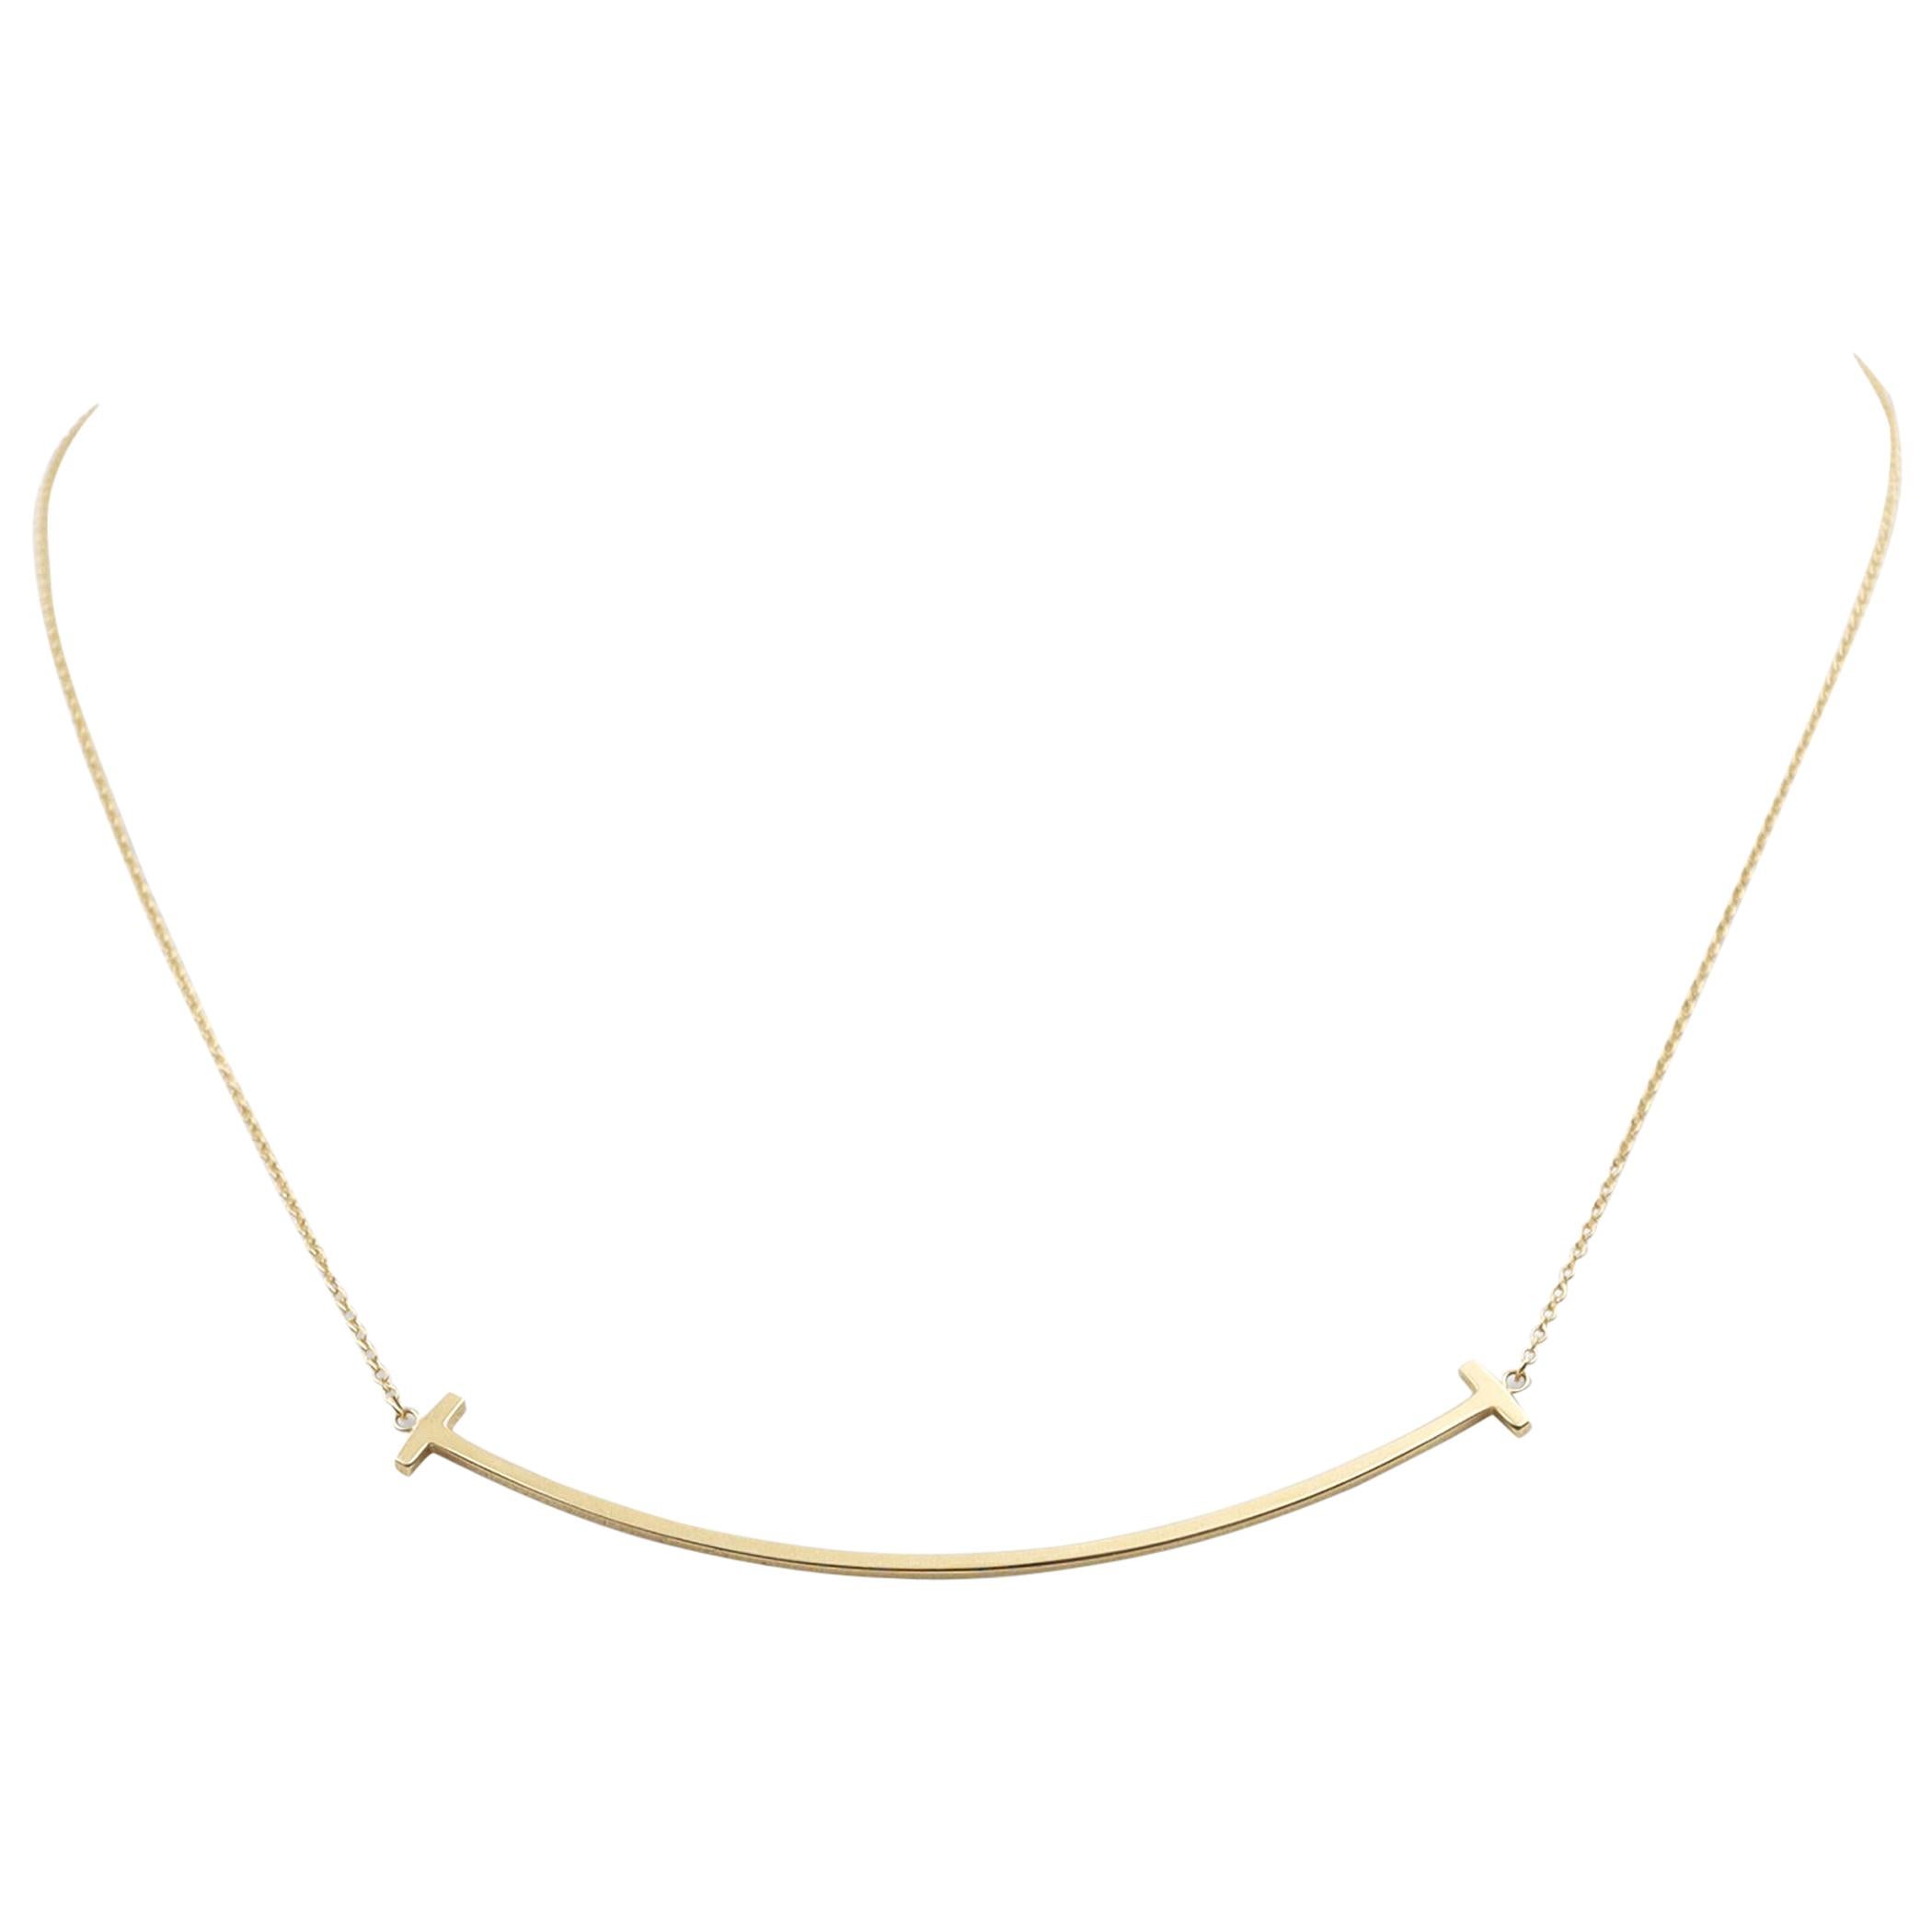 Tiffany & Co. Yellow Gold Smile Pendant Necklace